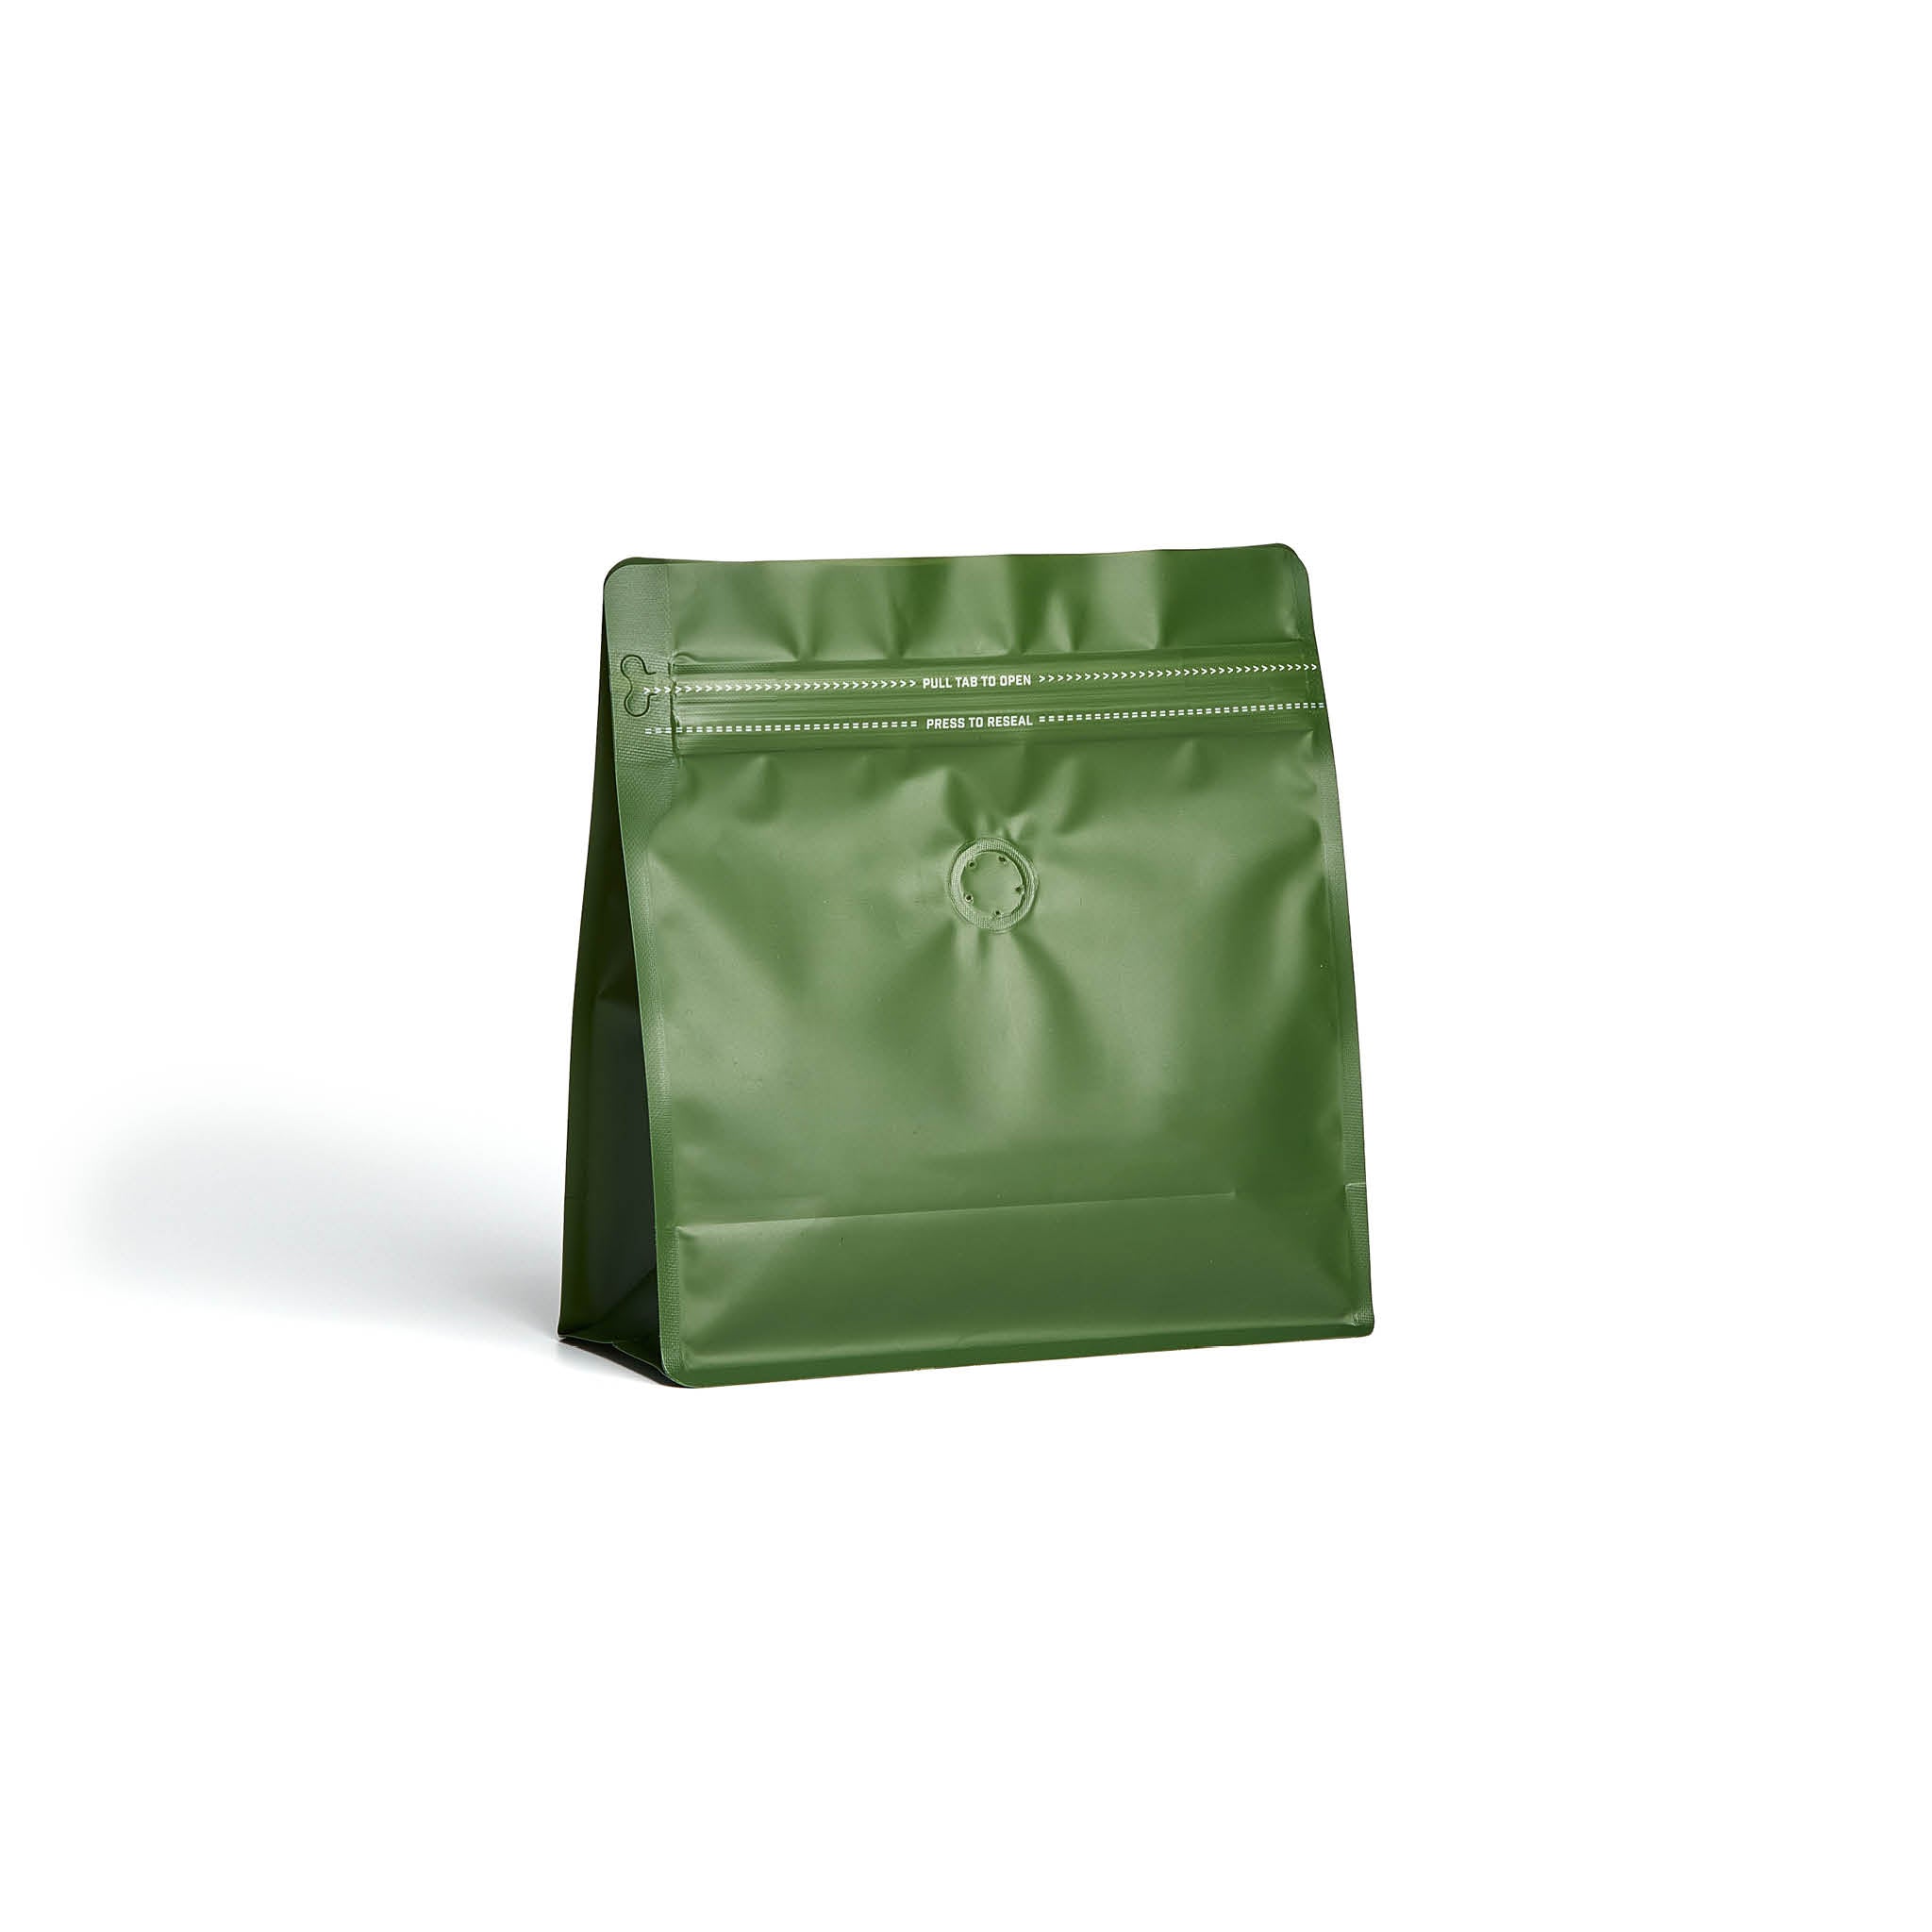 Square Box Bottom Bag with Rippa Zipper and Valve